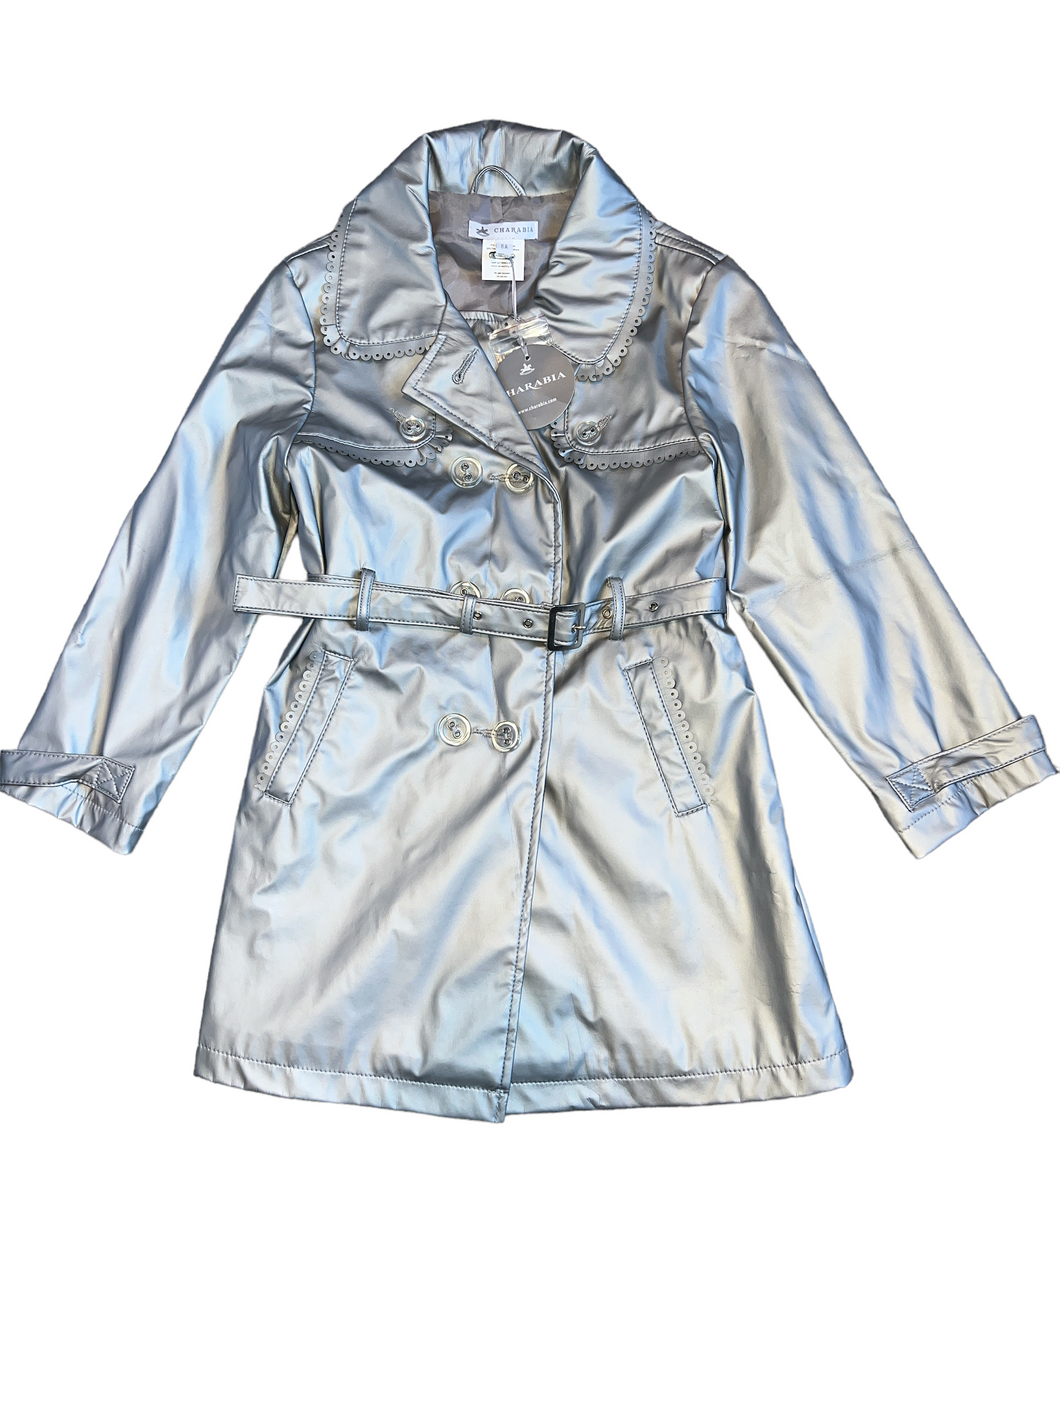 Charabia girls water resistant metallic trench style rain coat 6 (NEW w/ defects)